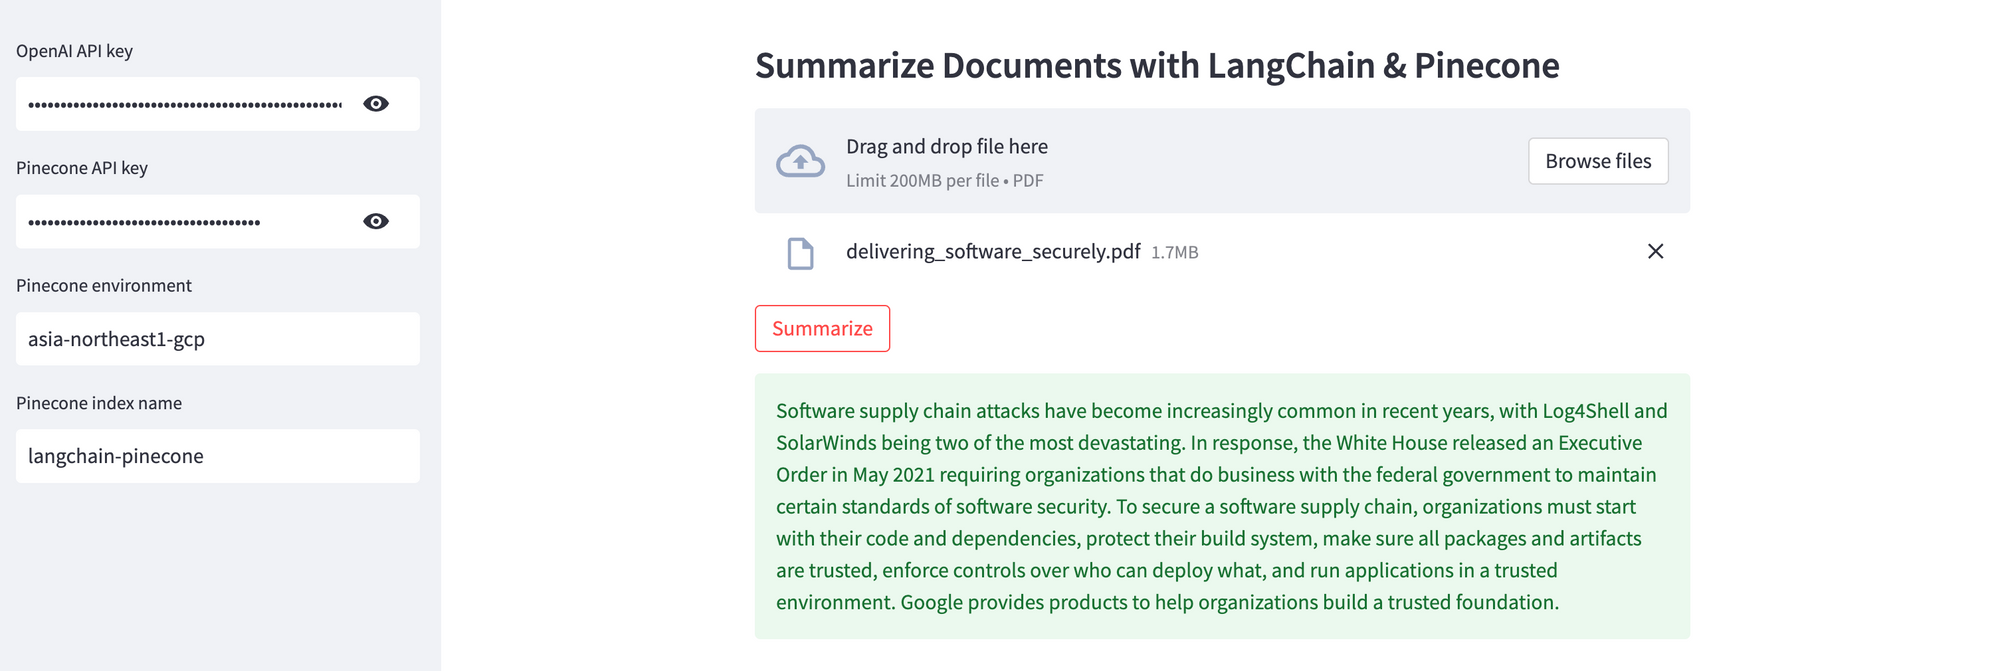 Sample document summary using LangChain and Pinecone